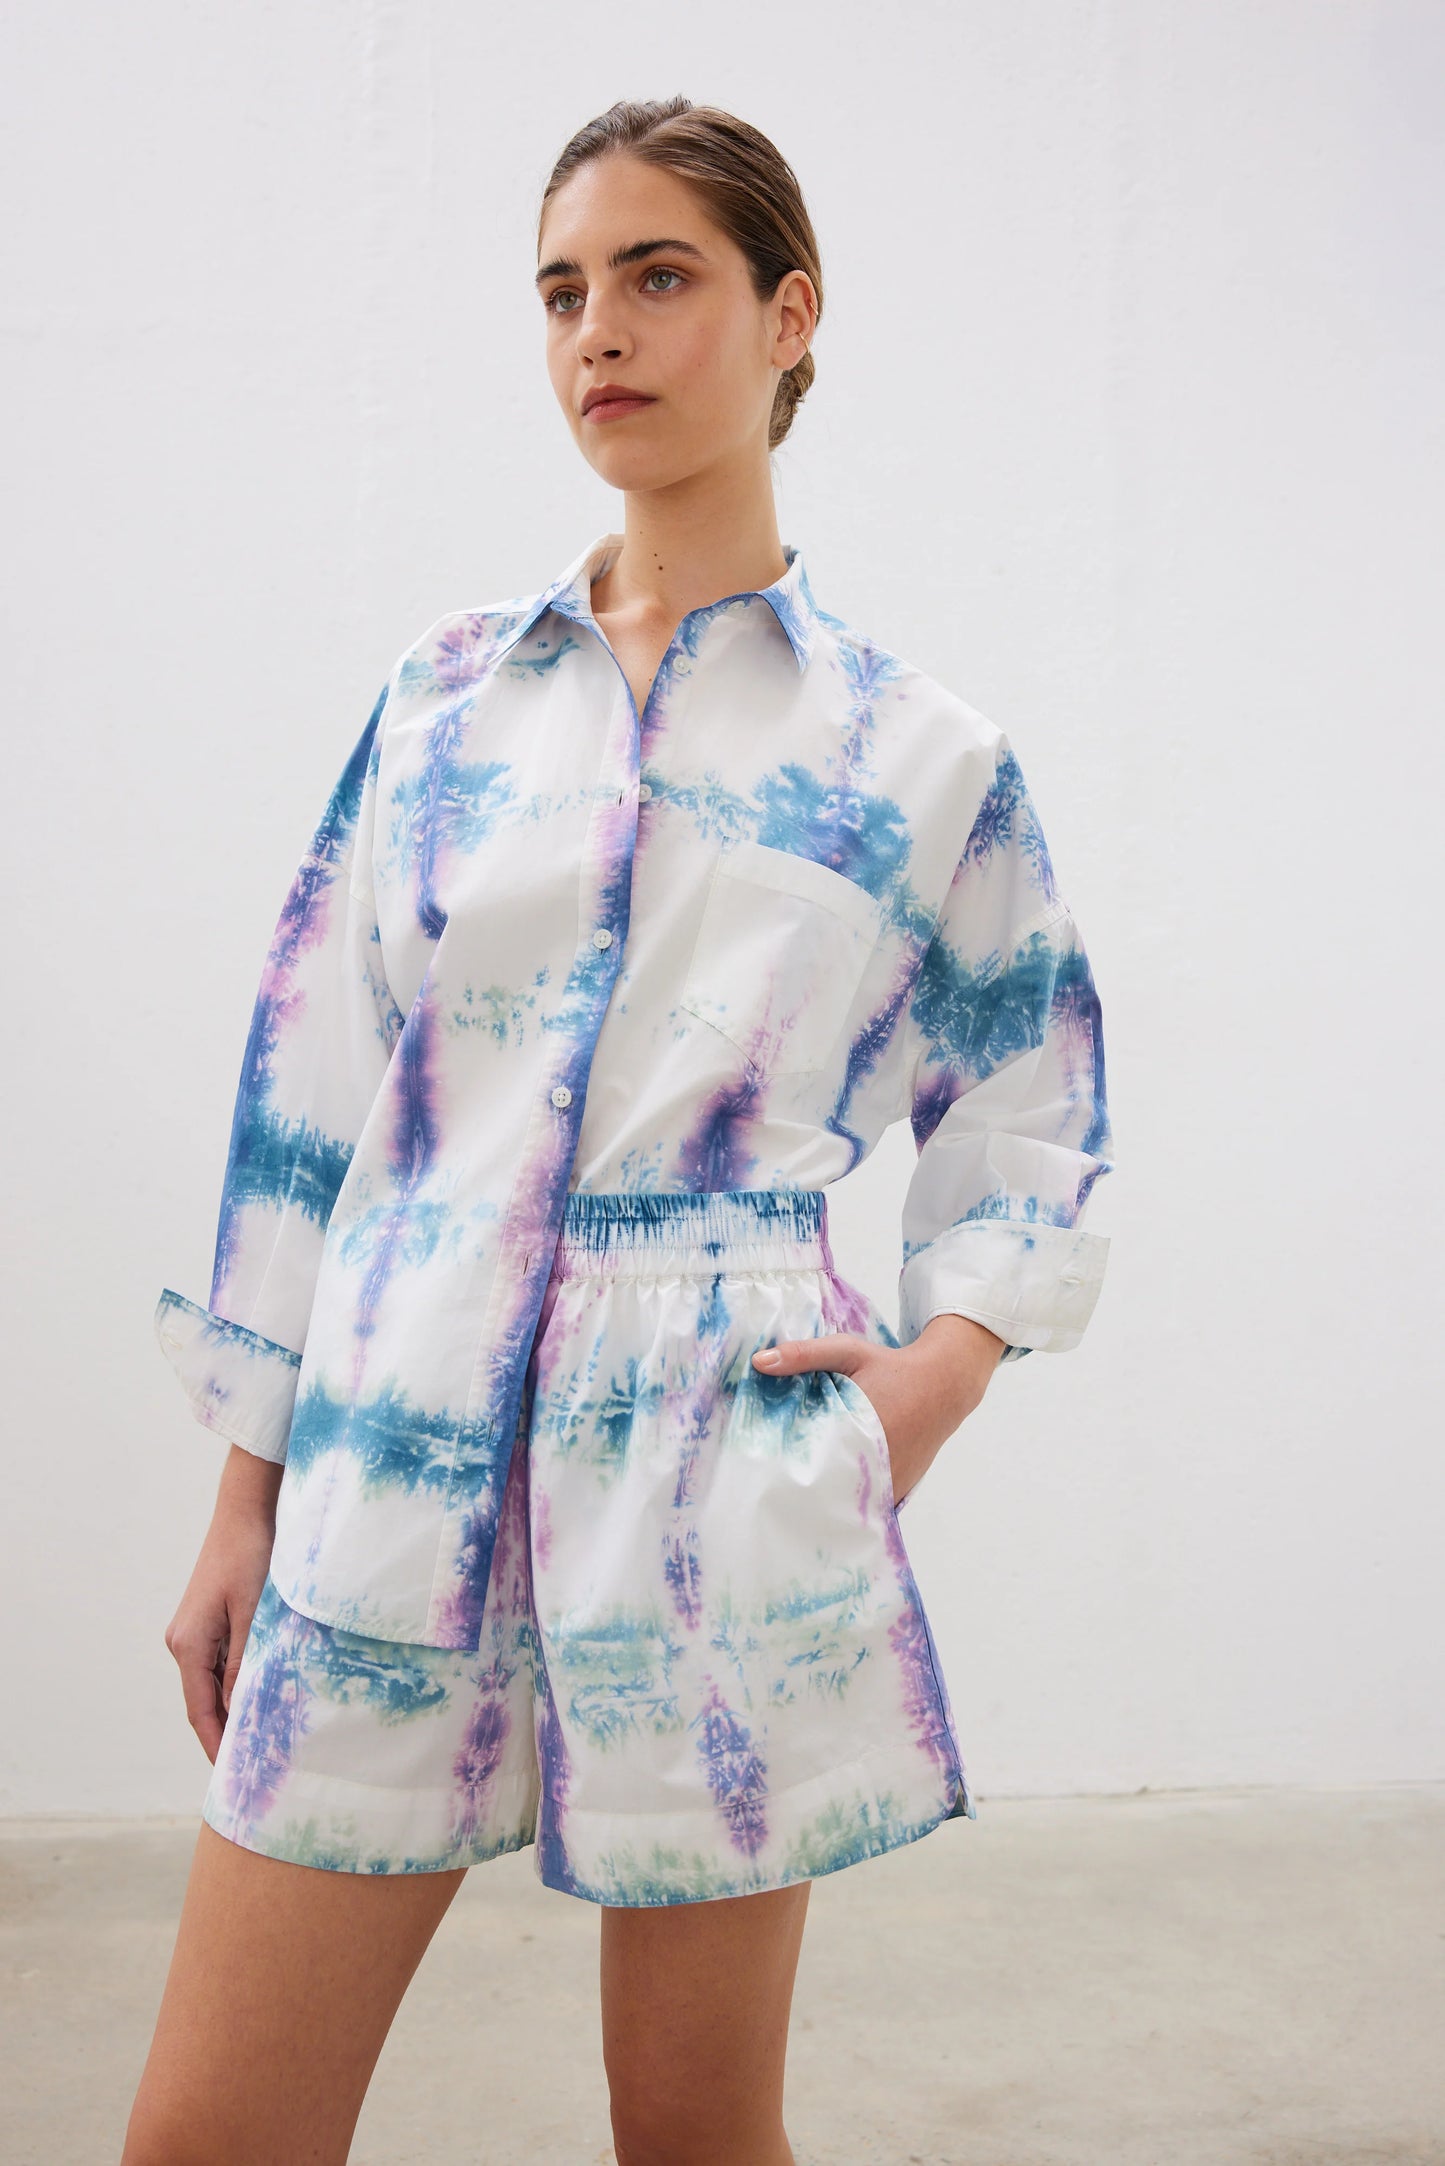 The Chiara Shirt in Violet Light and Oceanic Tie Dye